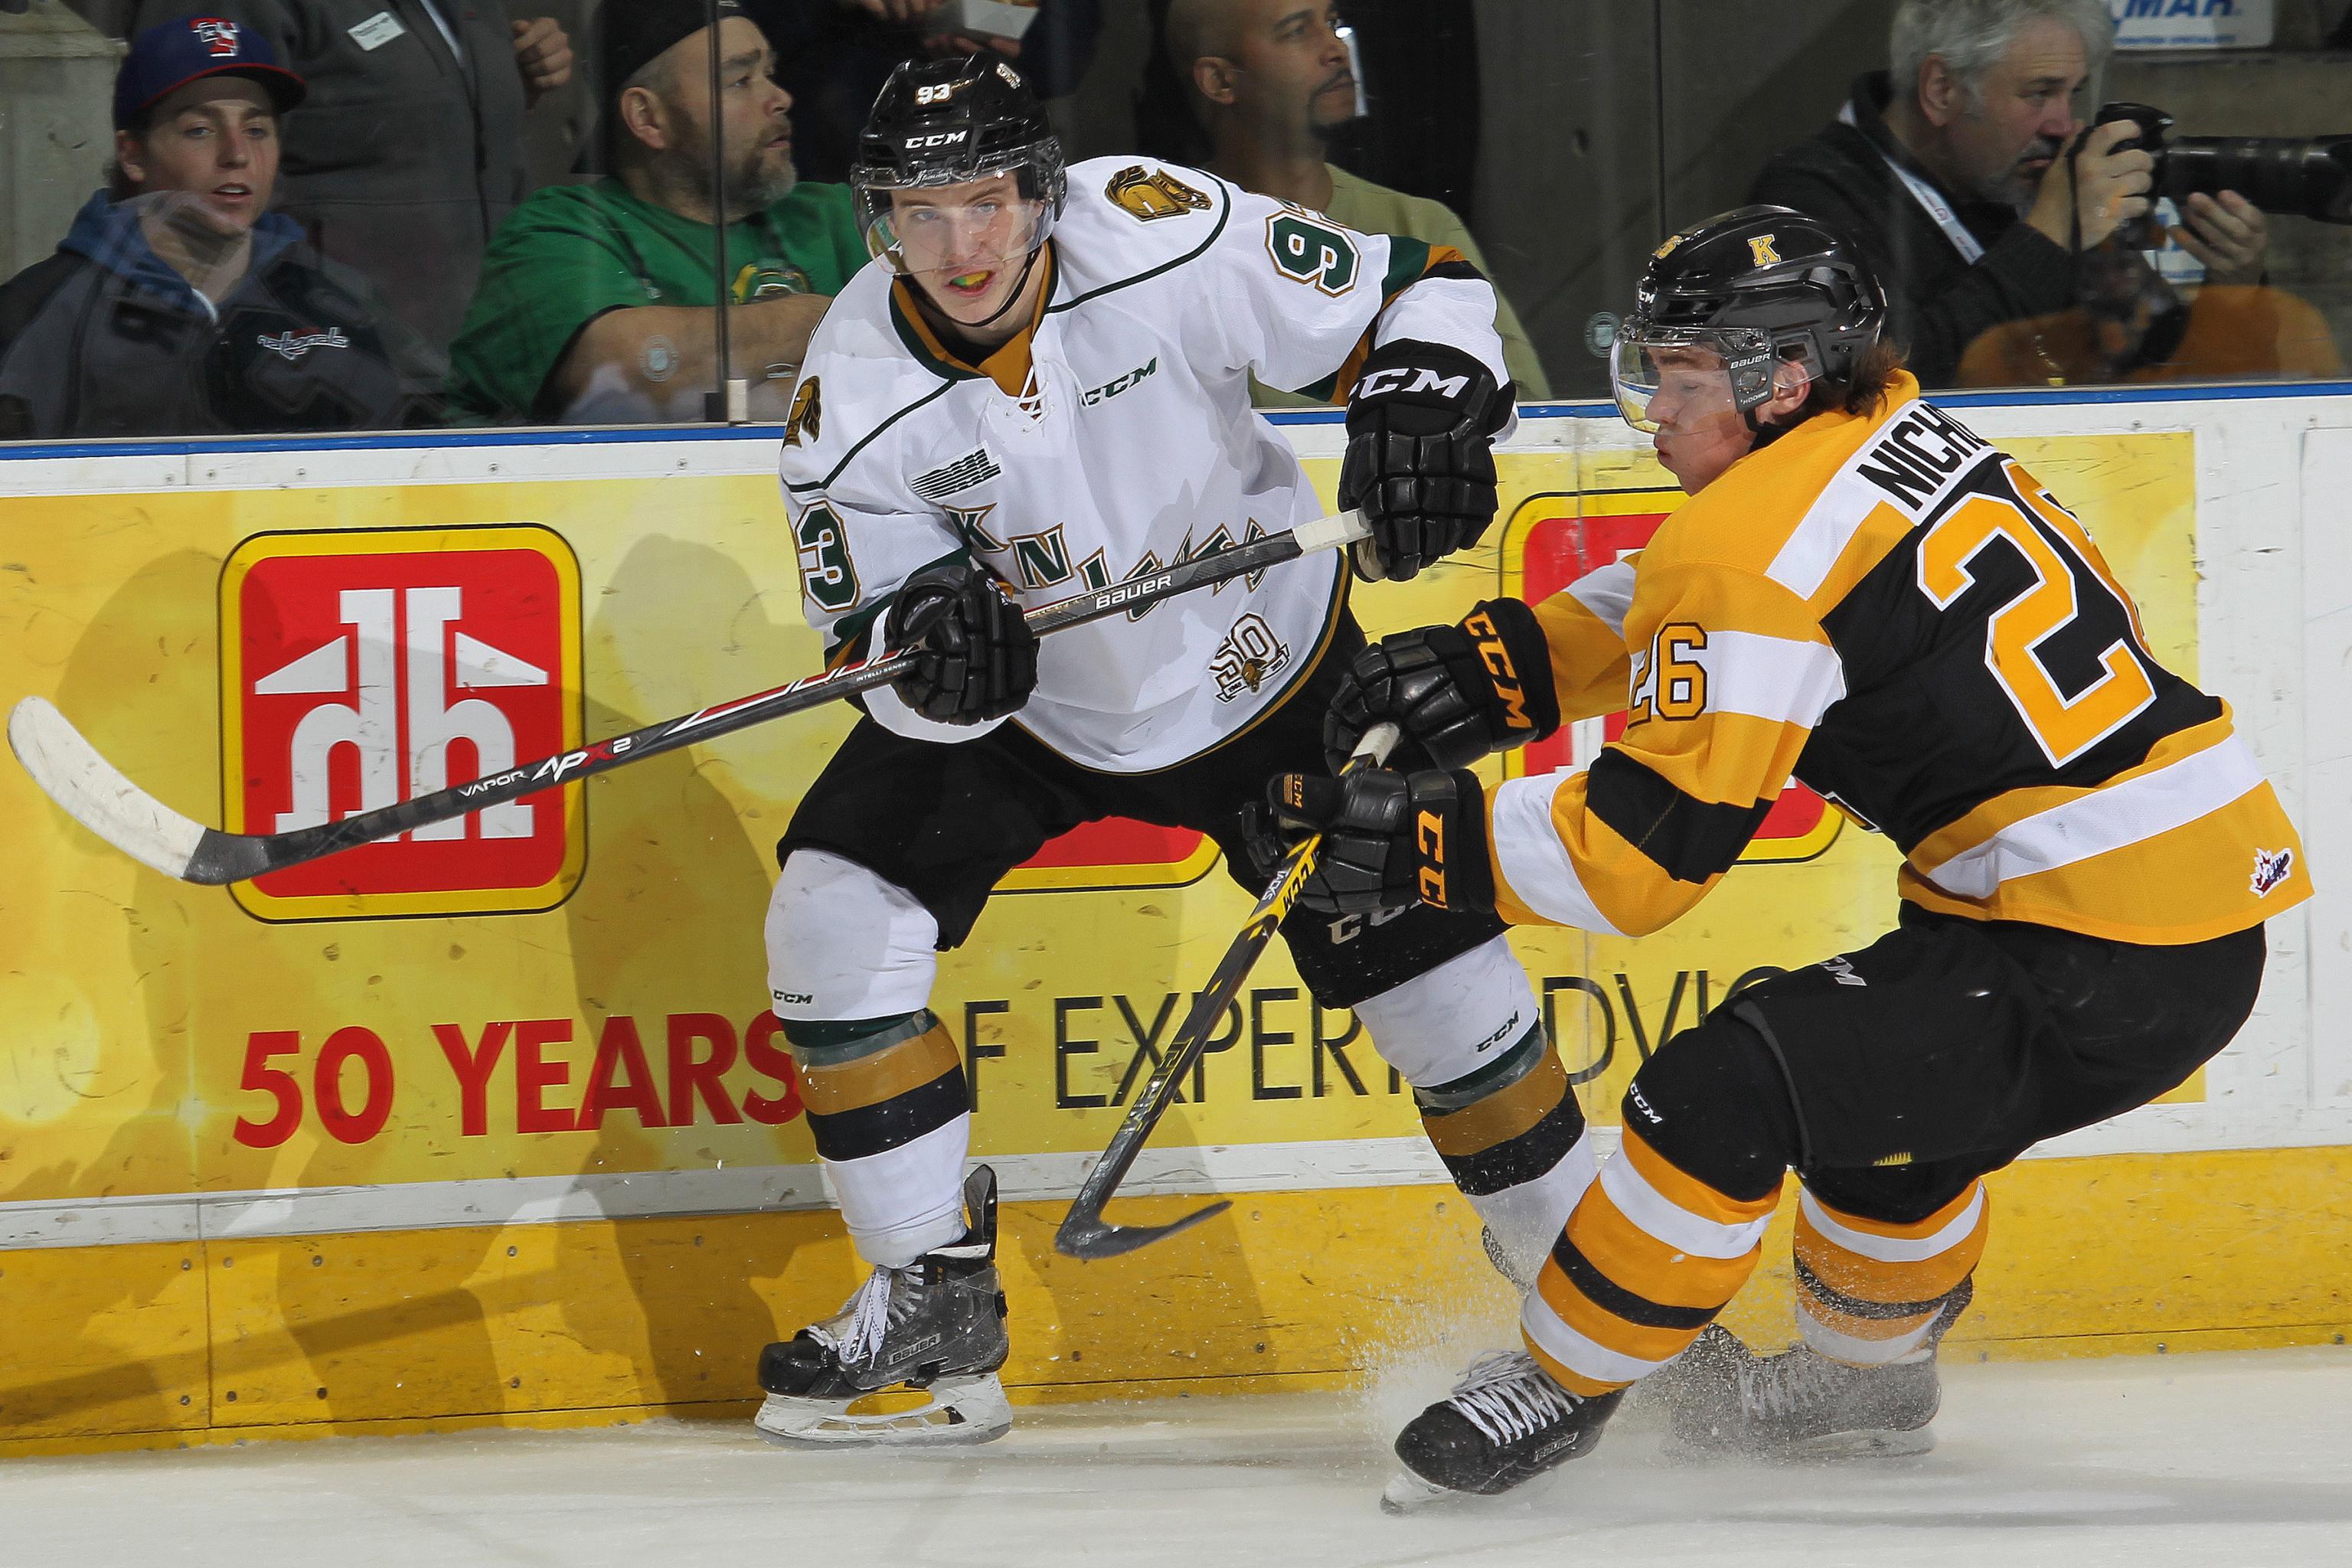 MARNER NAMED OHL PLAYER OF THE WEEK - London Knights